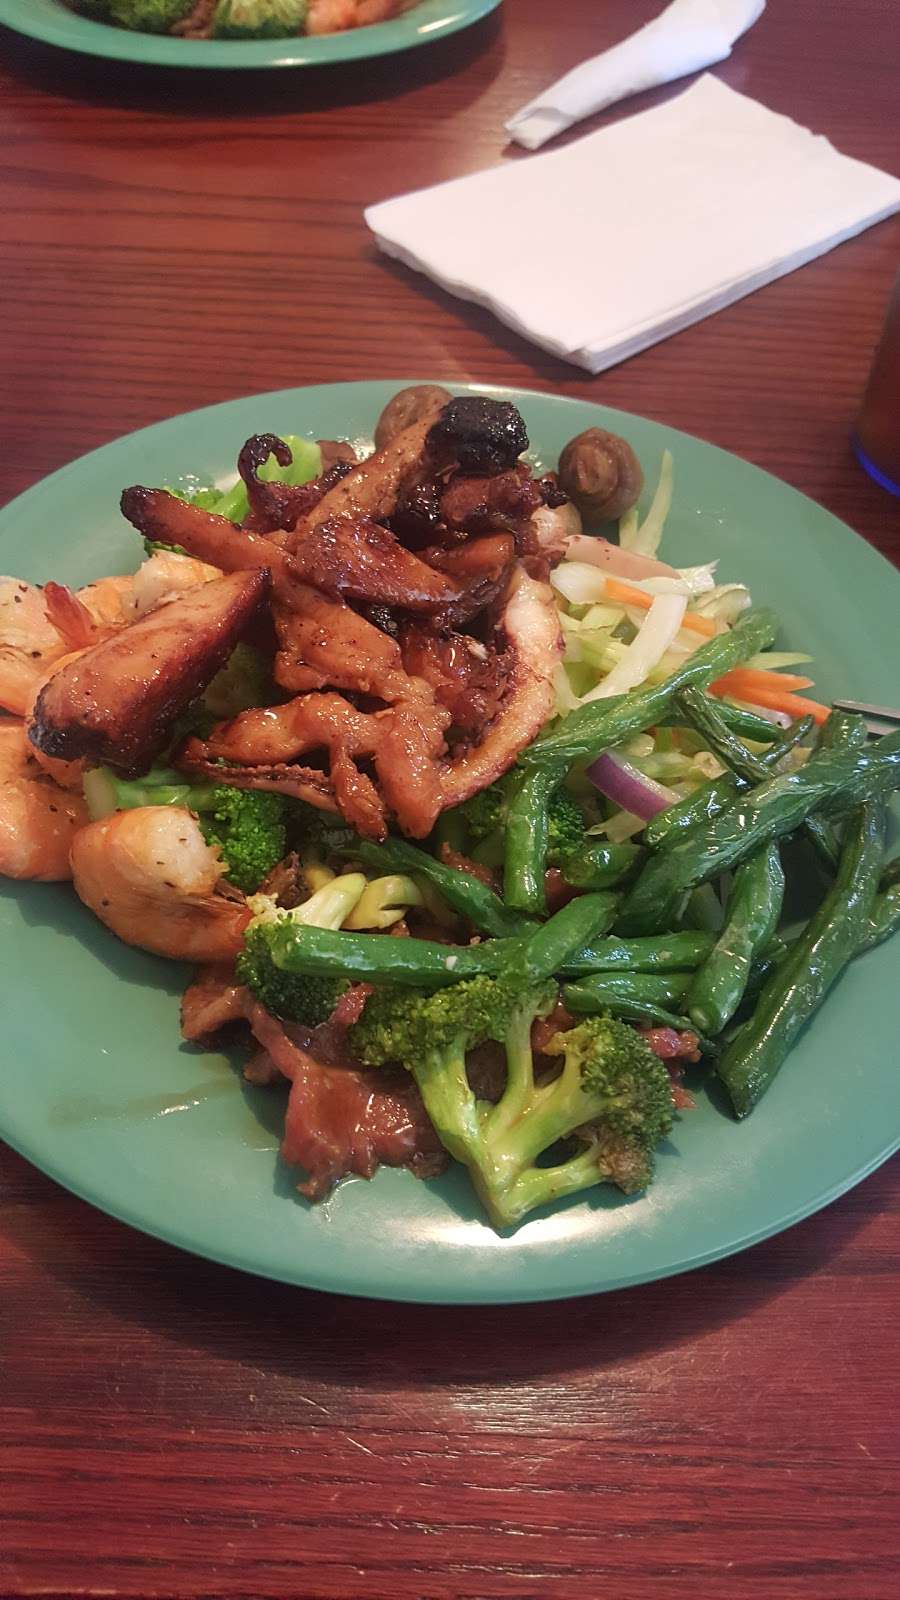 The Great Wall Super Buffet | 3215 S Wadsworth Blvd, Lakewood, CO 80227 | Phone: (720) 963-1888